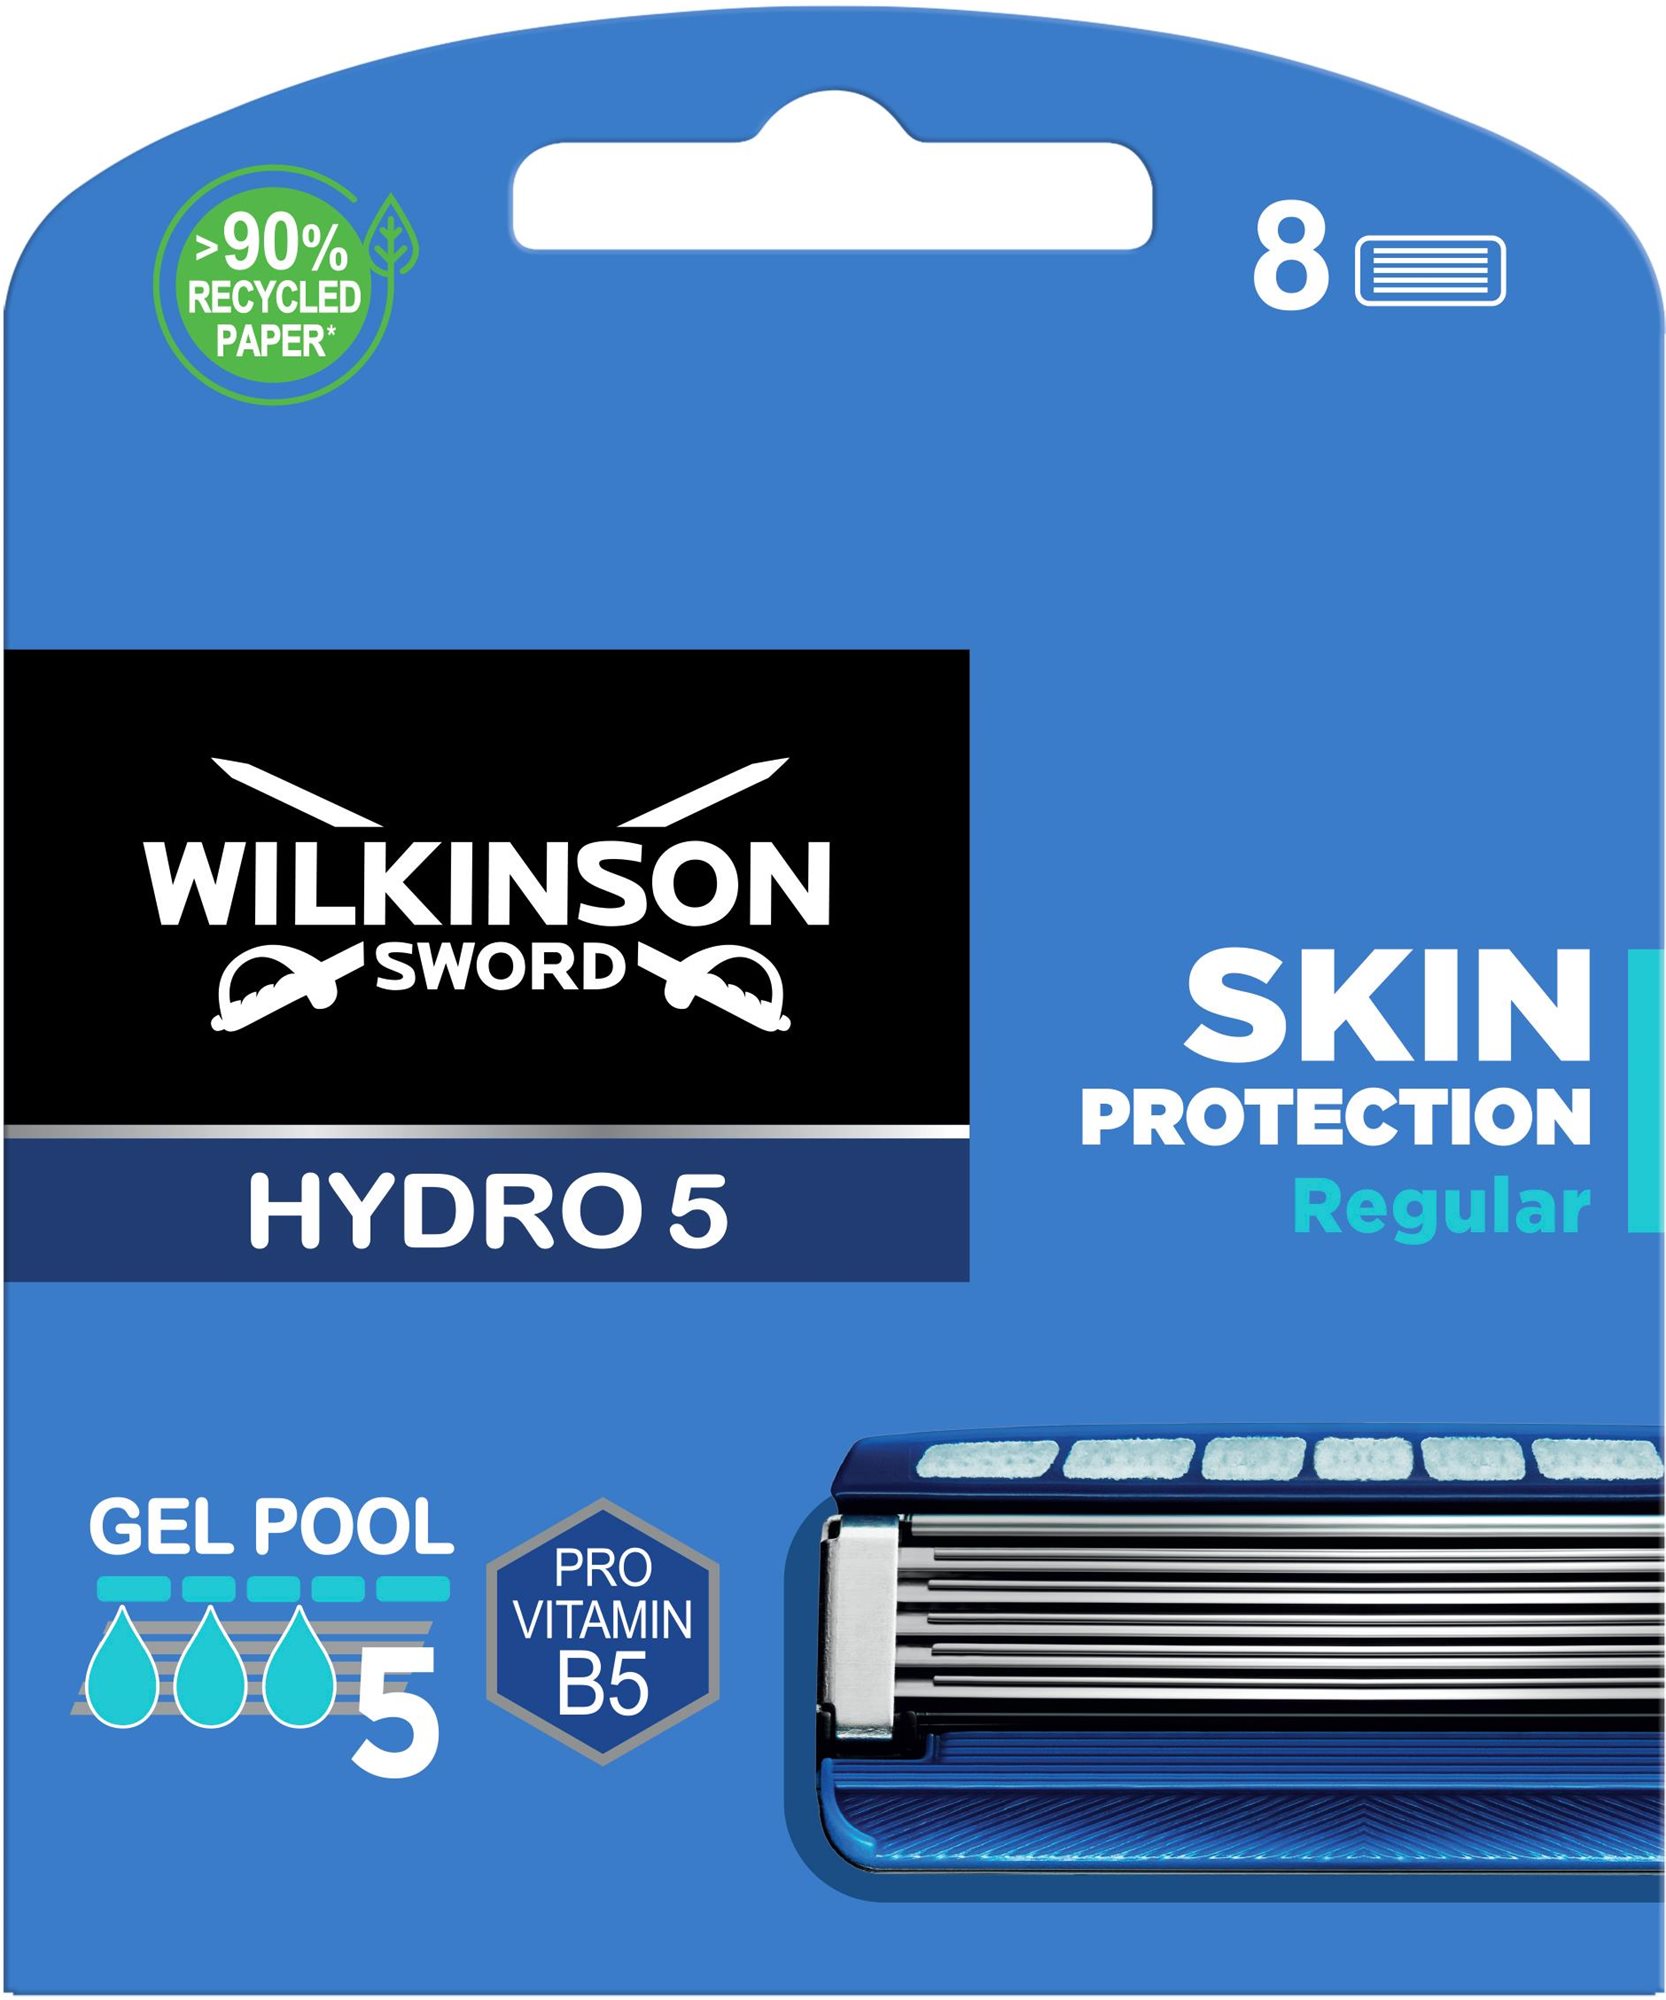 WILKINSON Hydro 5 Skin Protection Borotvabetét 8 db